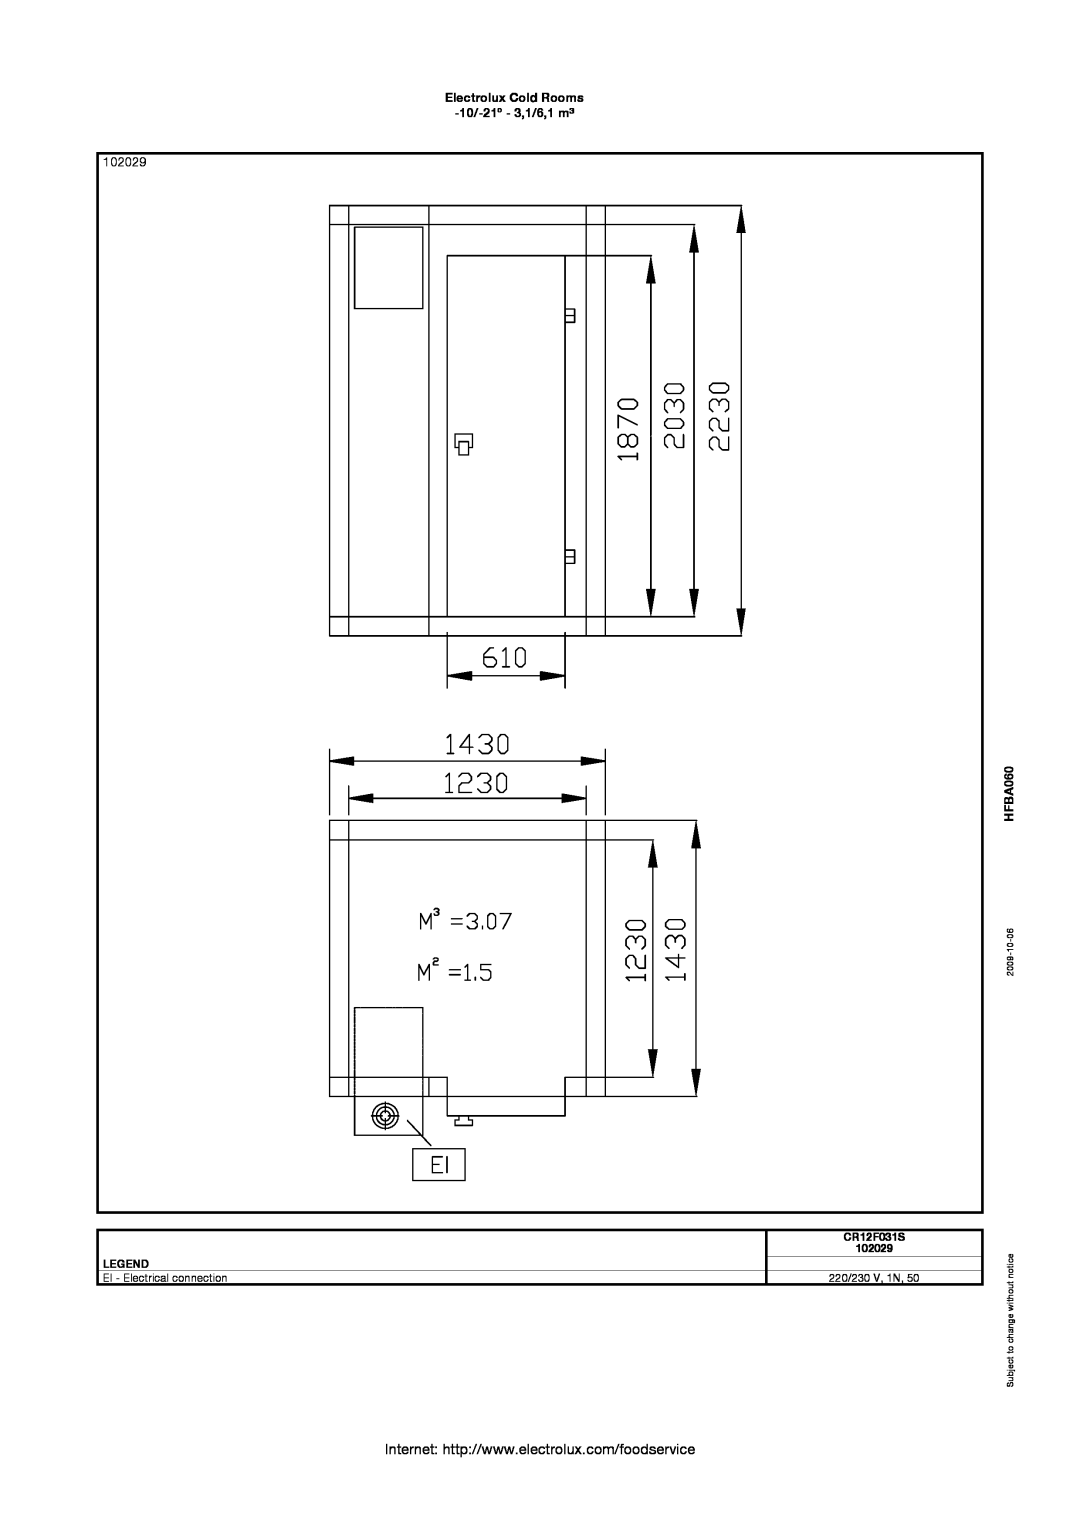 Electrolux CR16F041S 102029, Electrolux Cold Rooms 10/-21º - 3,1/6,1 m³, HFBA060, CR12F031S, EI - Electrical connection 